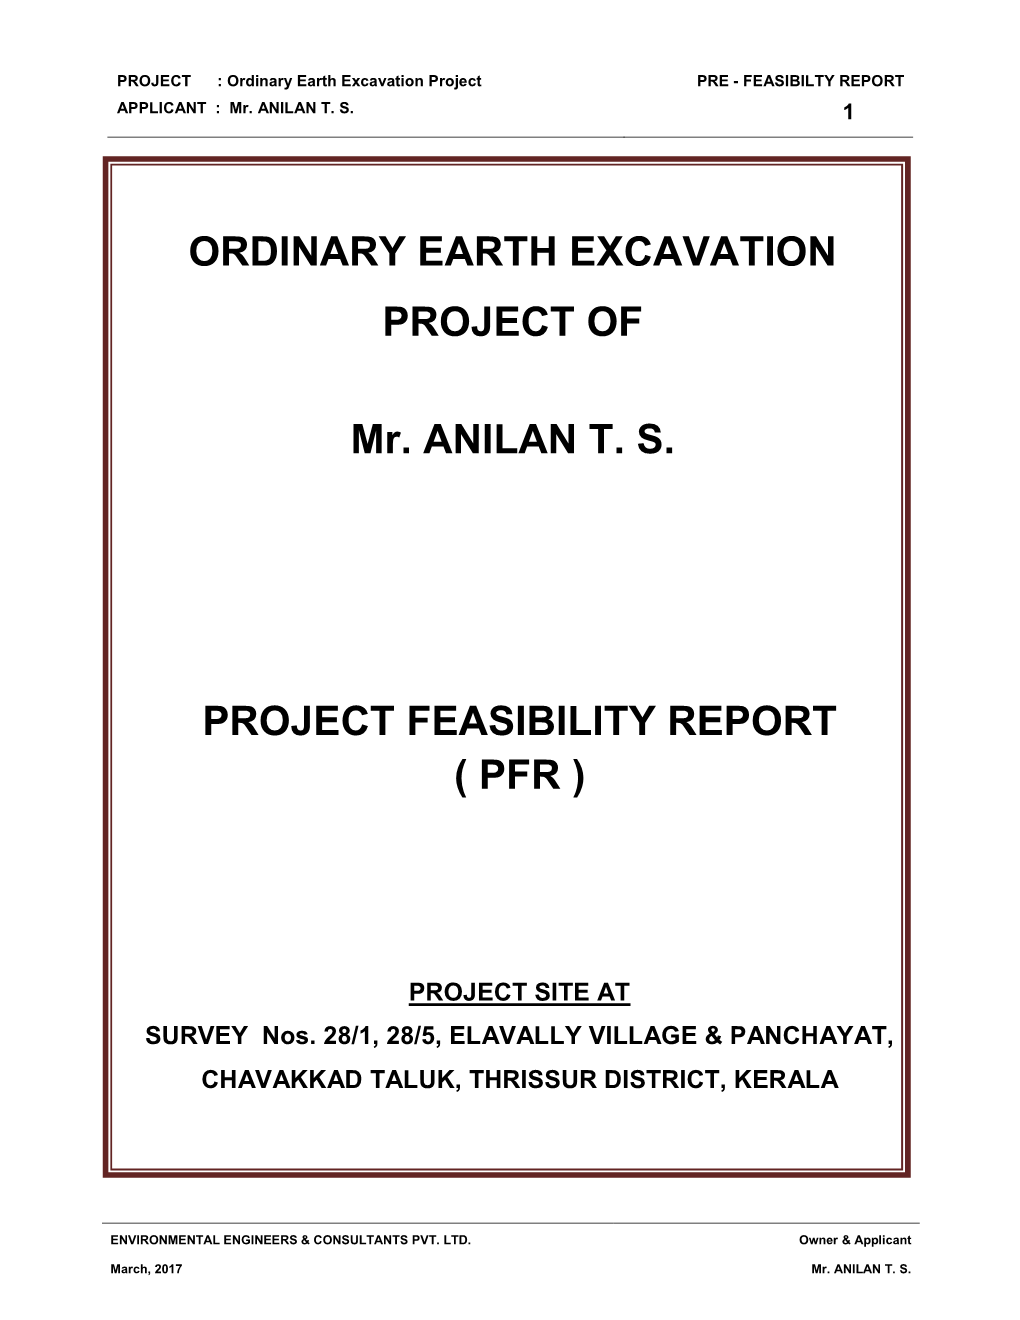 Ordinary Earth Excavation Project of Mr. Anilan T. S. Is Situated at Survey Nos